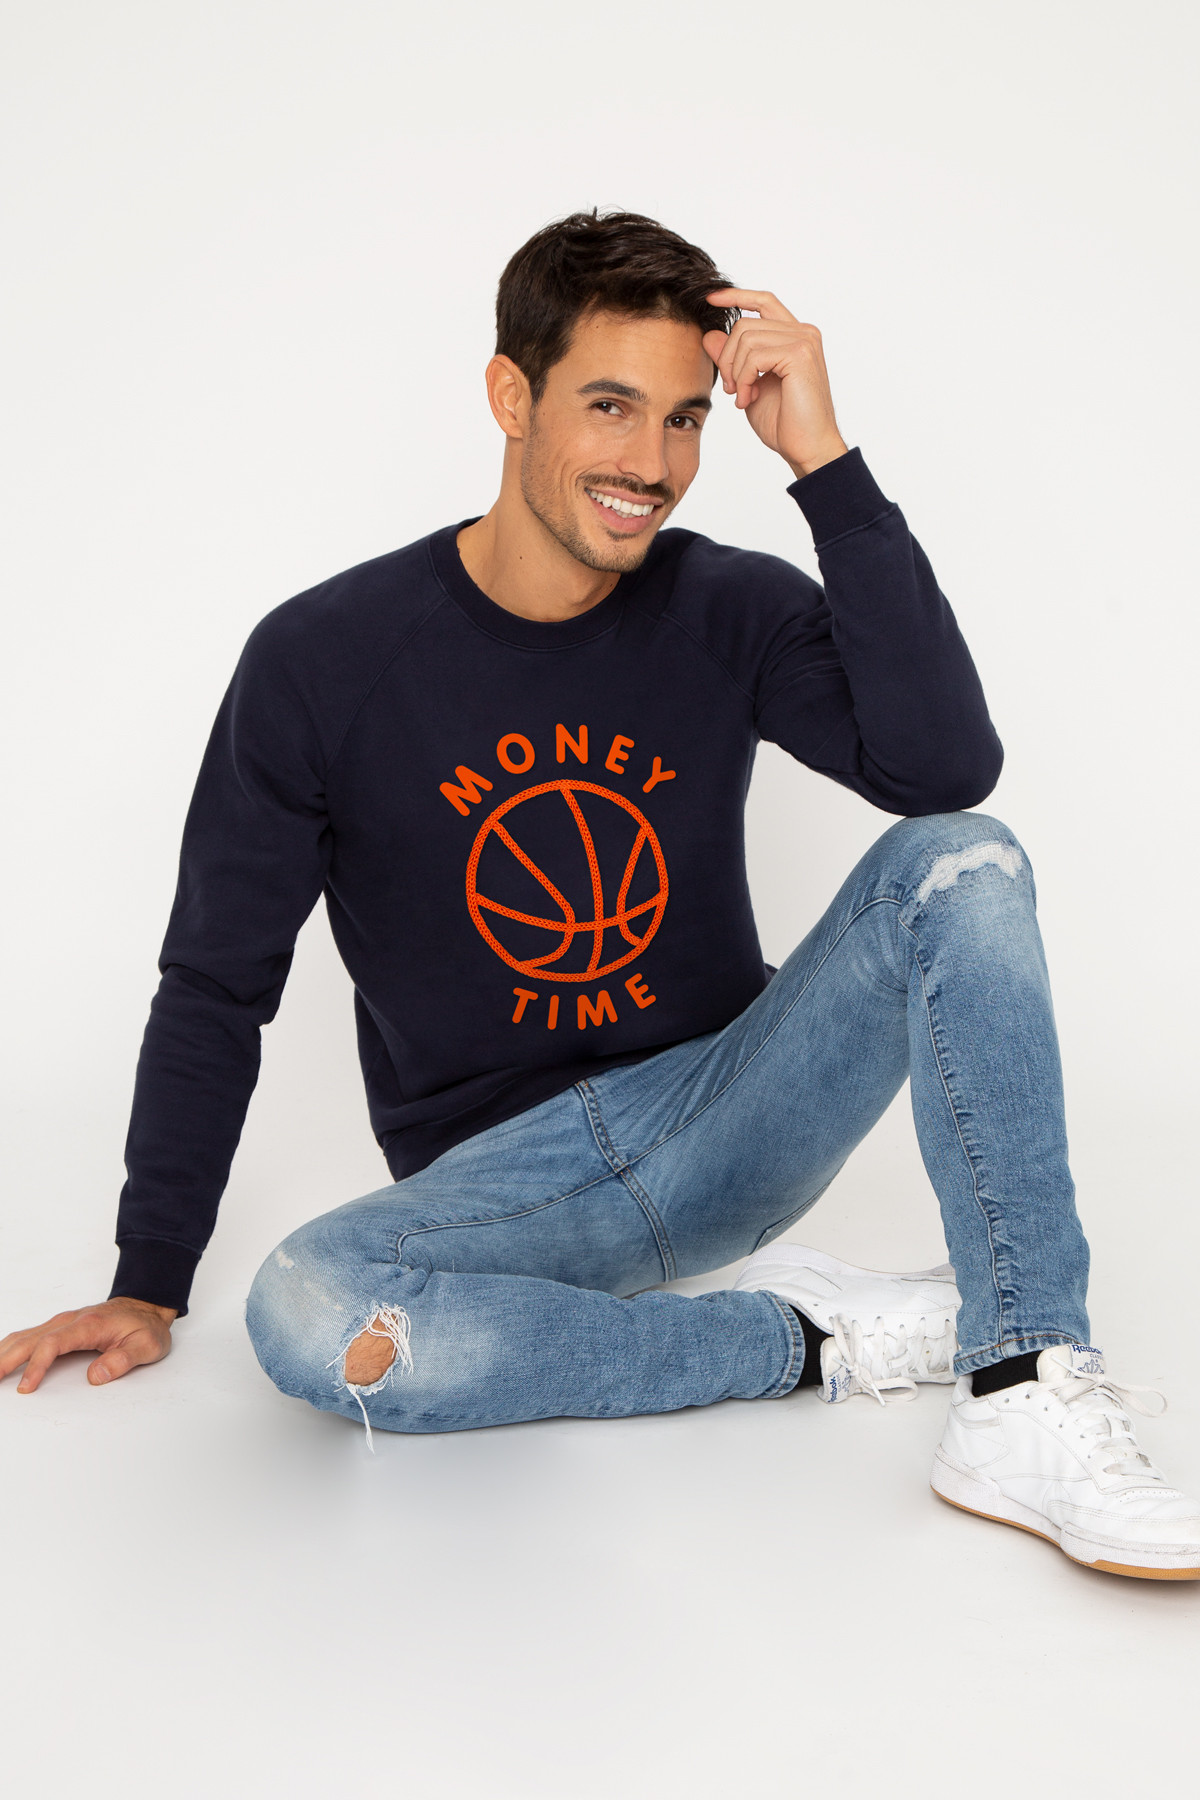 Photo de Anciennes collections homme Sweat MONEY TIME tricotin chez French Disorder